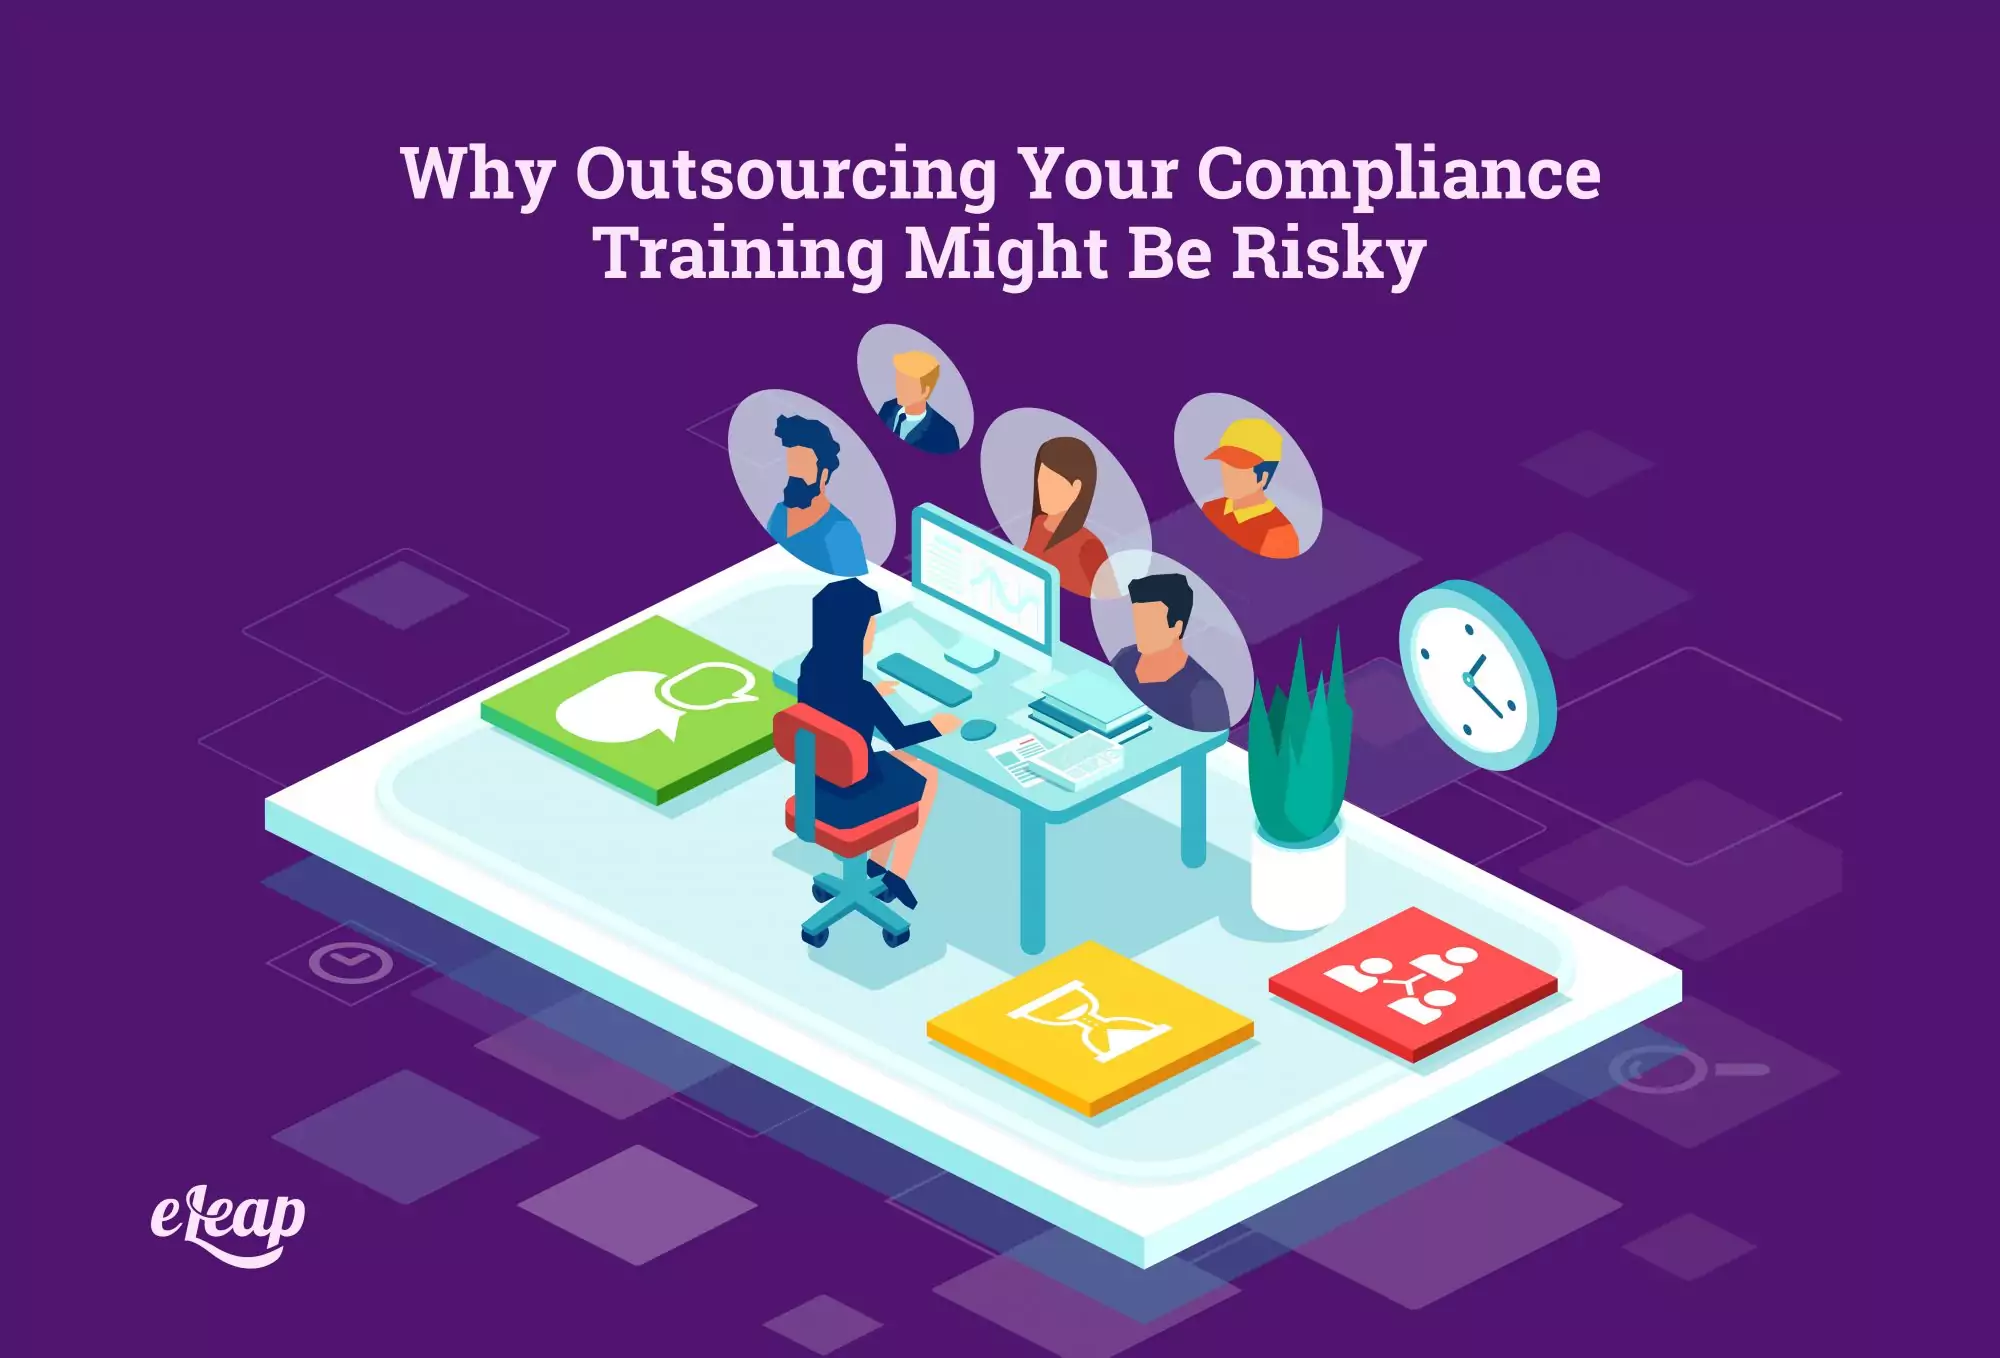 Why Outsourcing Your Compliance Training Might Be Risky